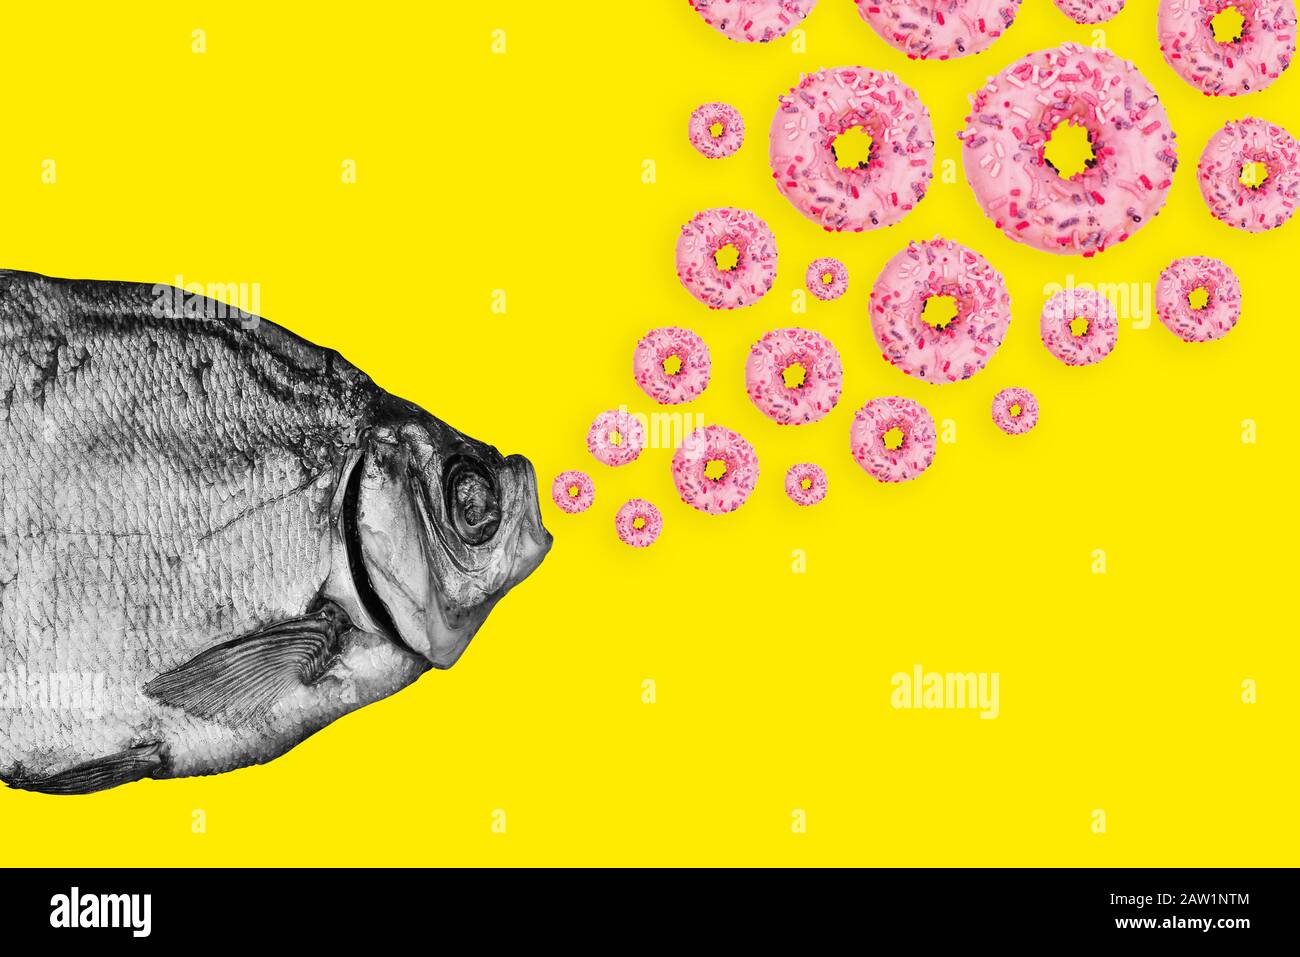 Concept fish and donuts on a colored background. Modern art collage Stock Photo